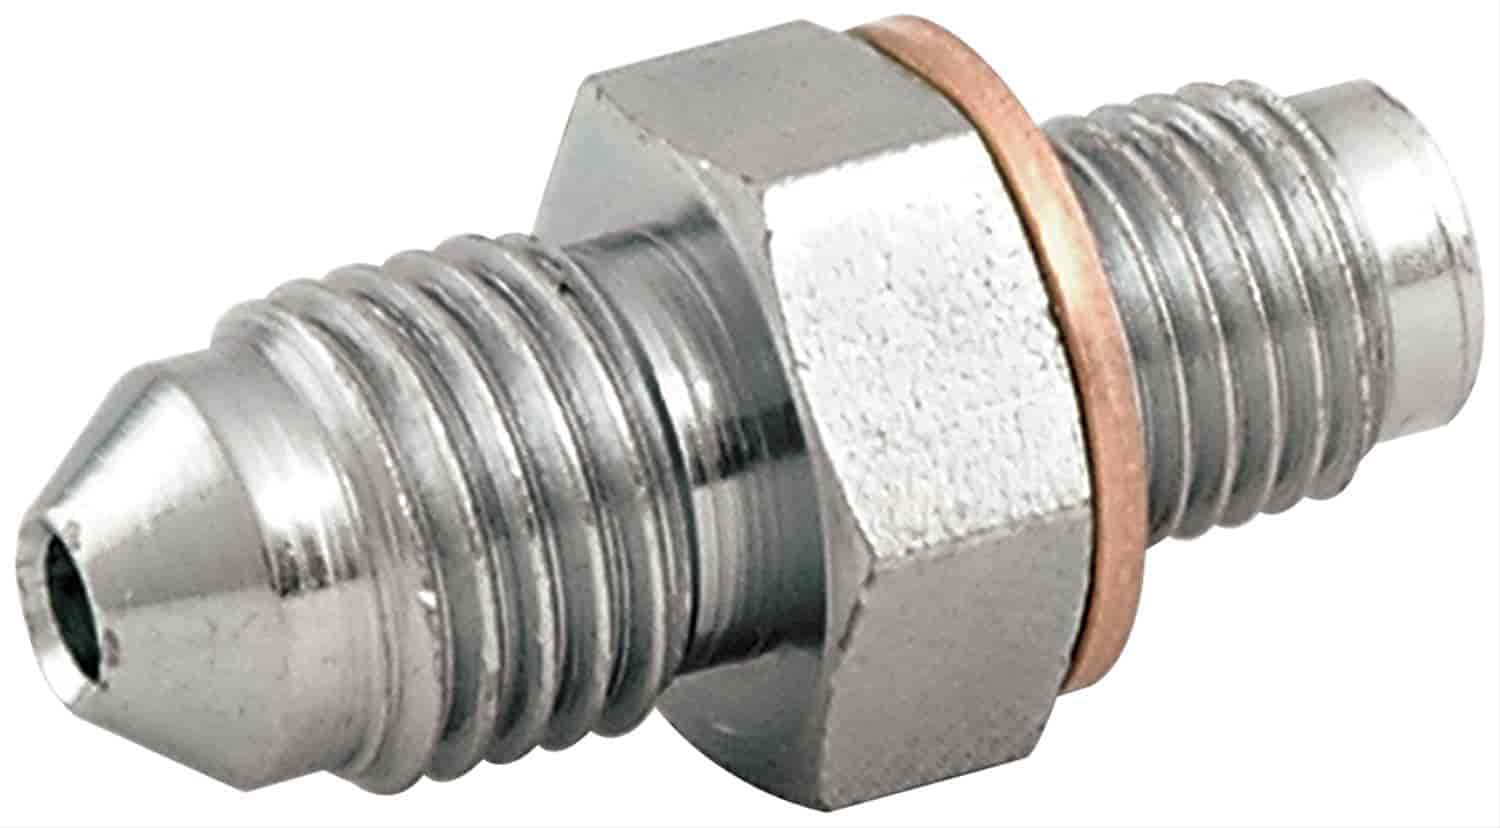 Adapter Fittings -4AN Male to 3/8